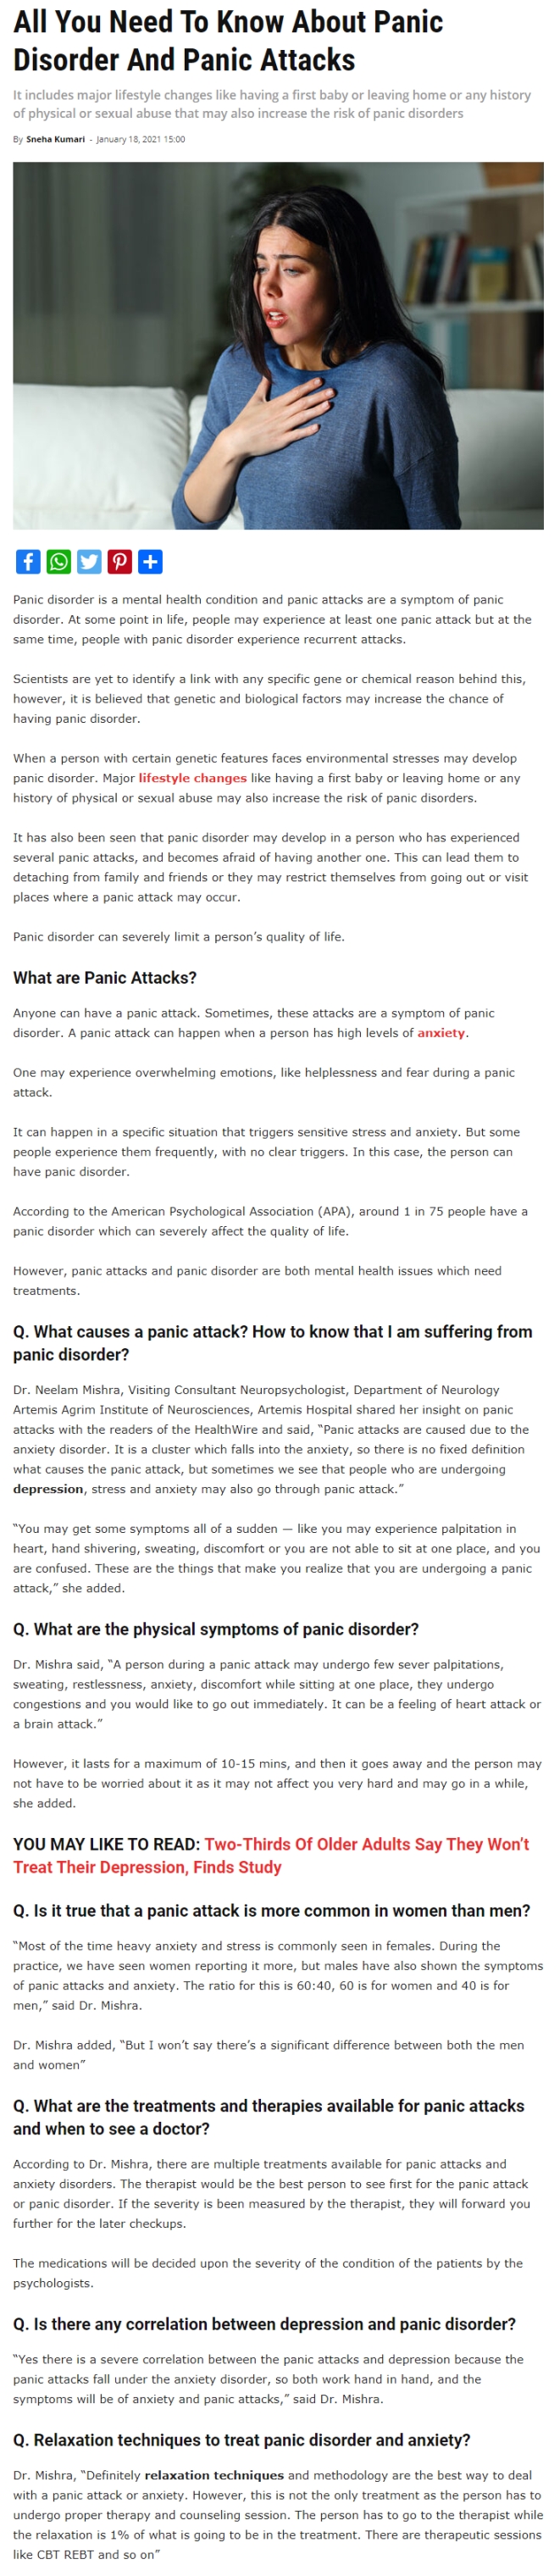 all-you-need-to-know-about-panic-disorder-and-panic-attacks